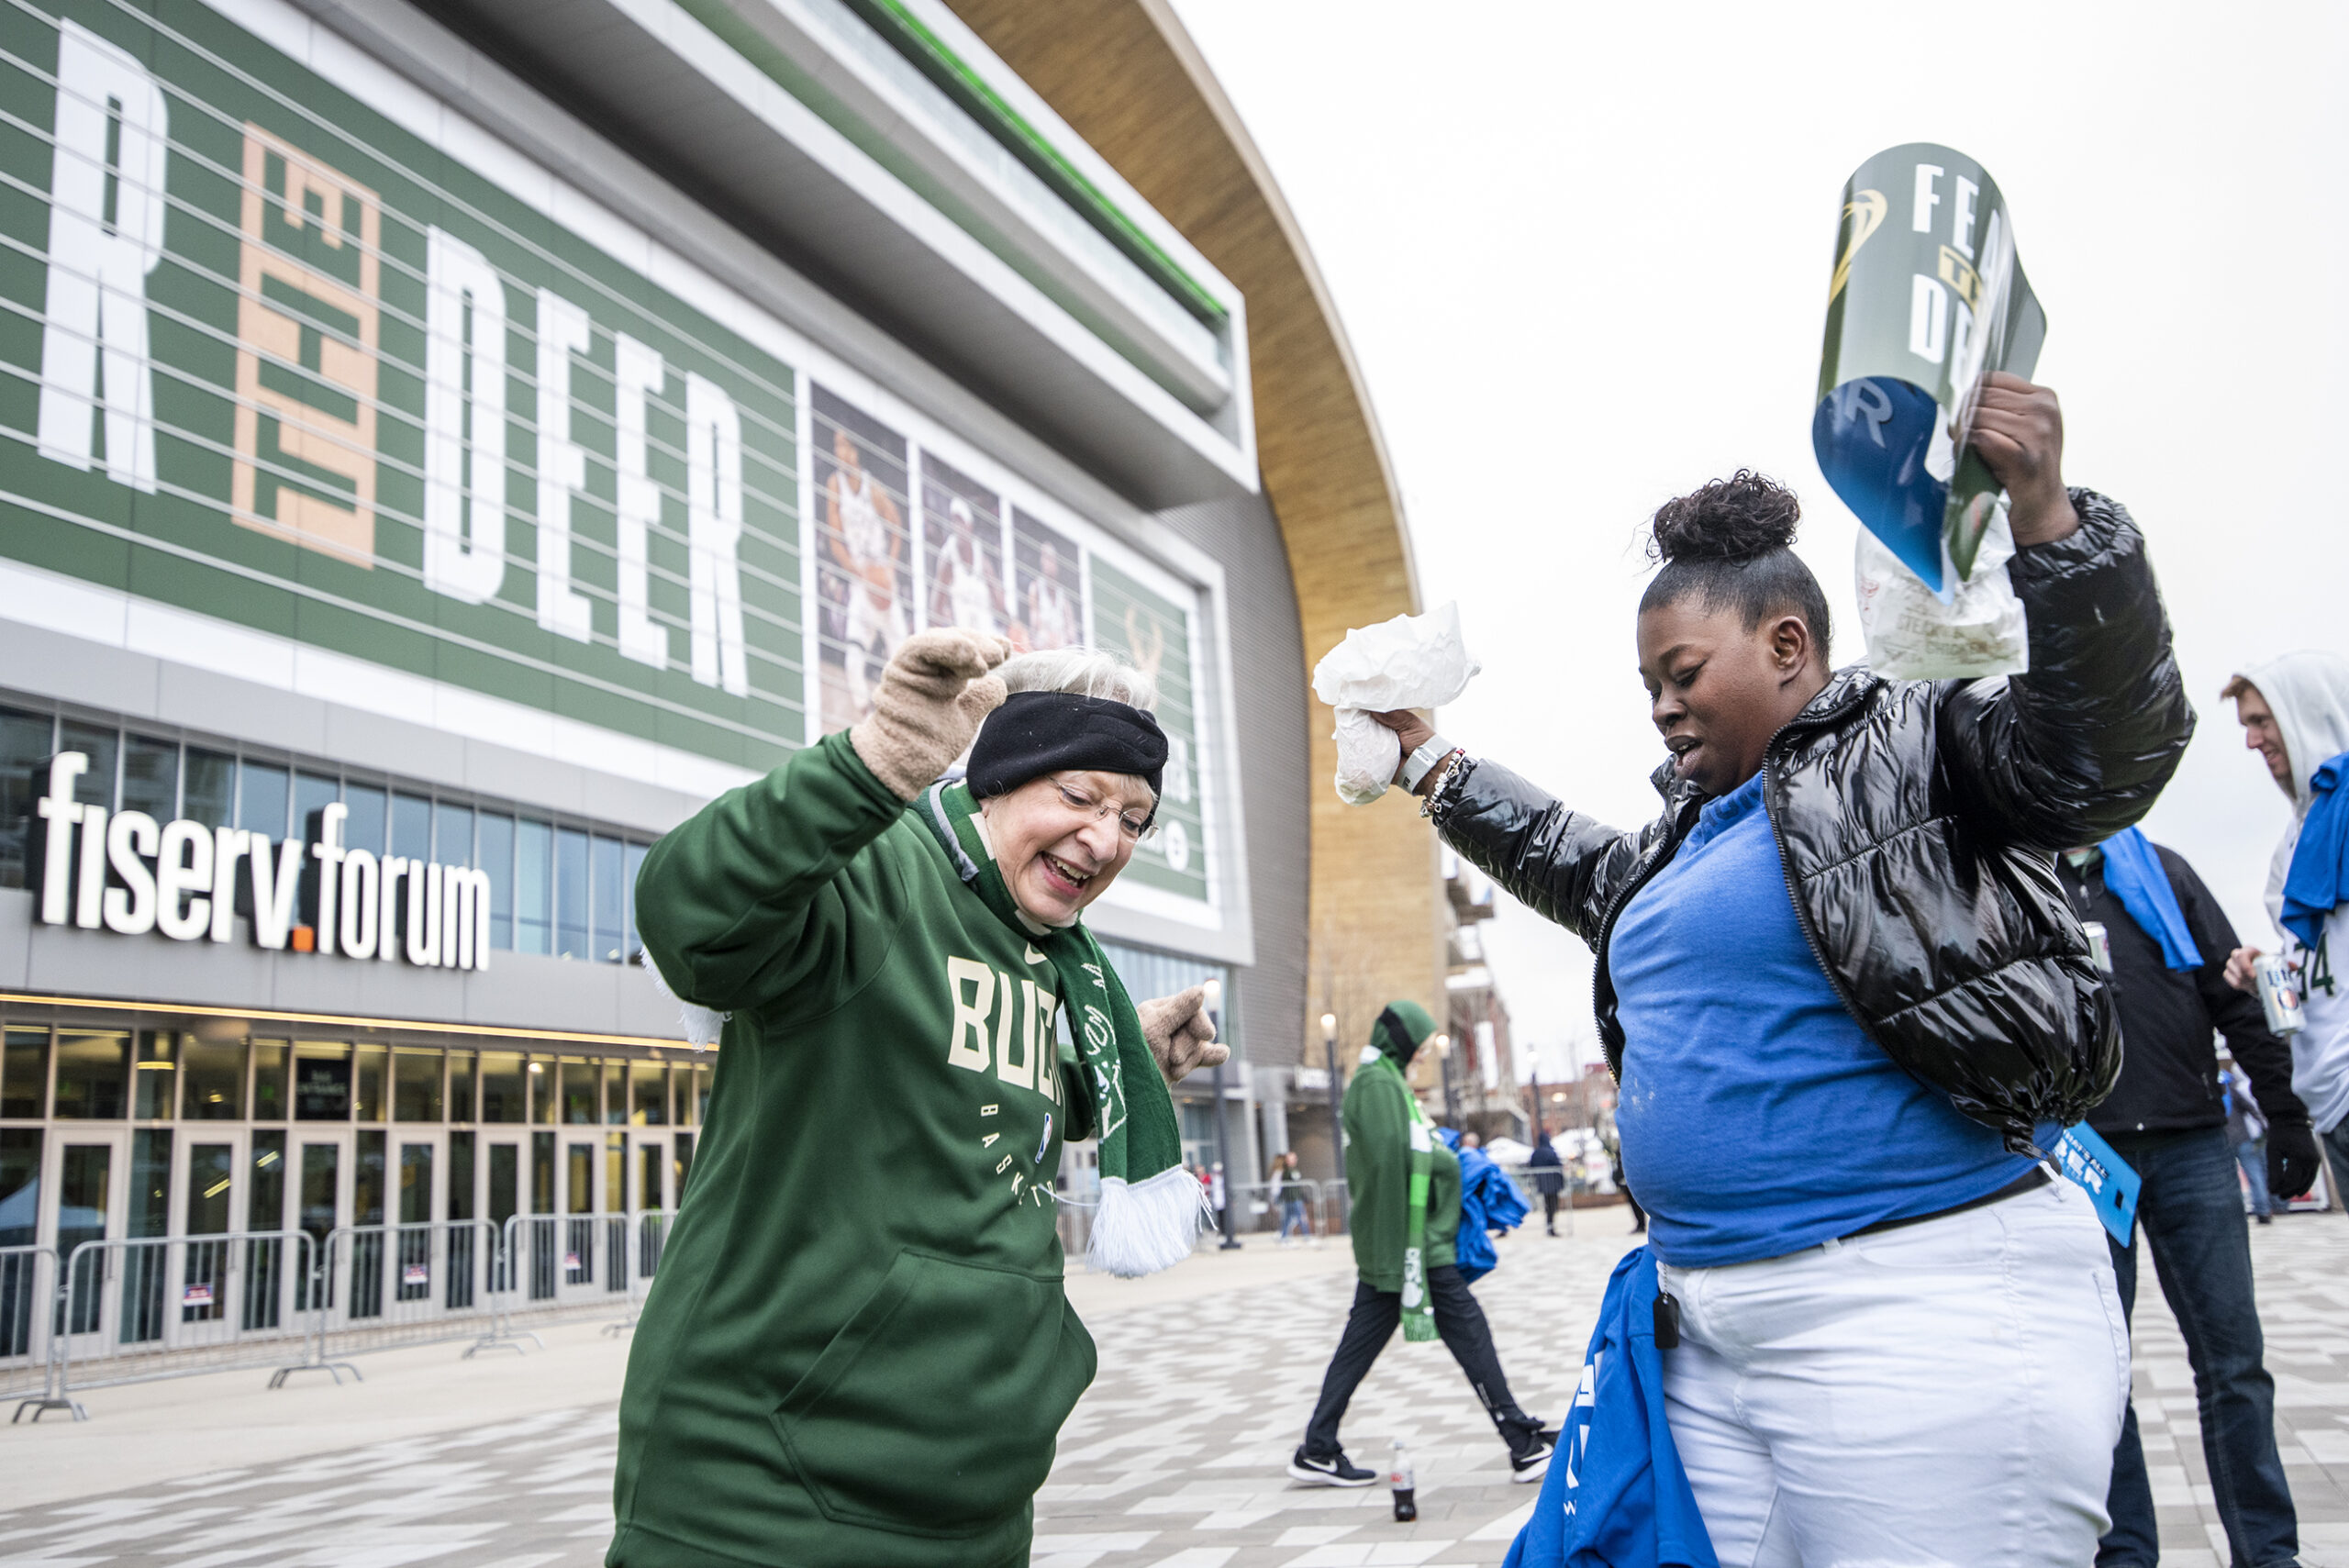 Two women raise their arms as they dance outside the Fiserv Forum.